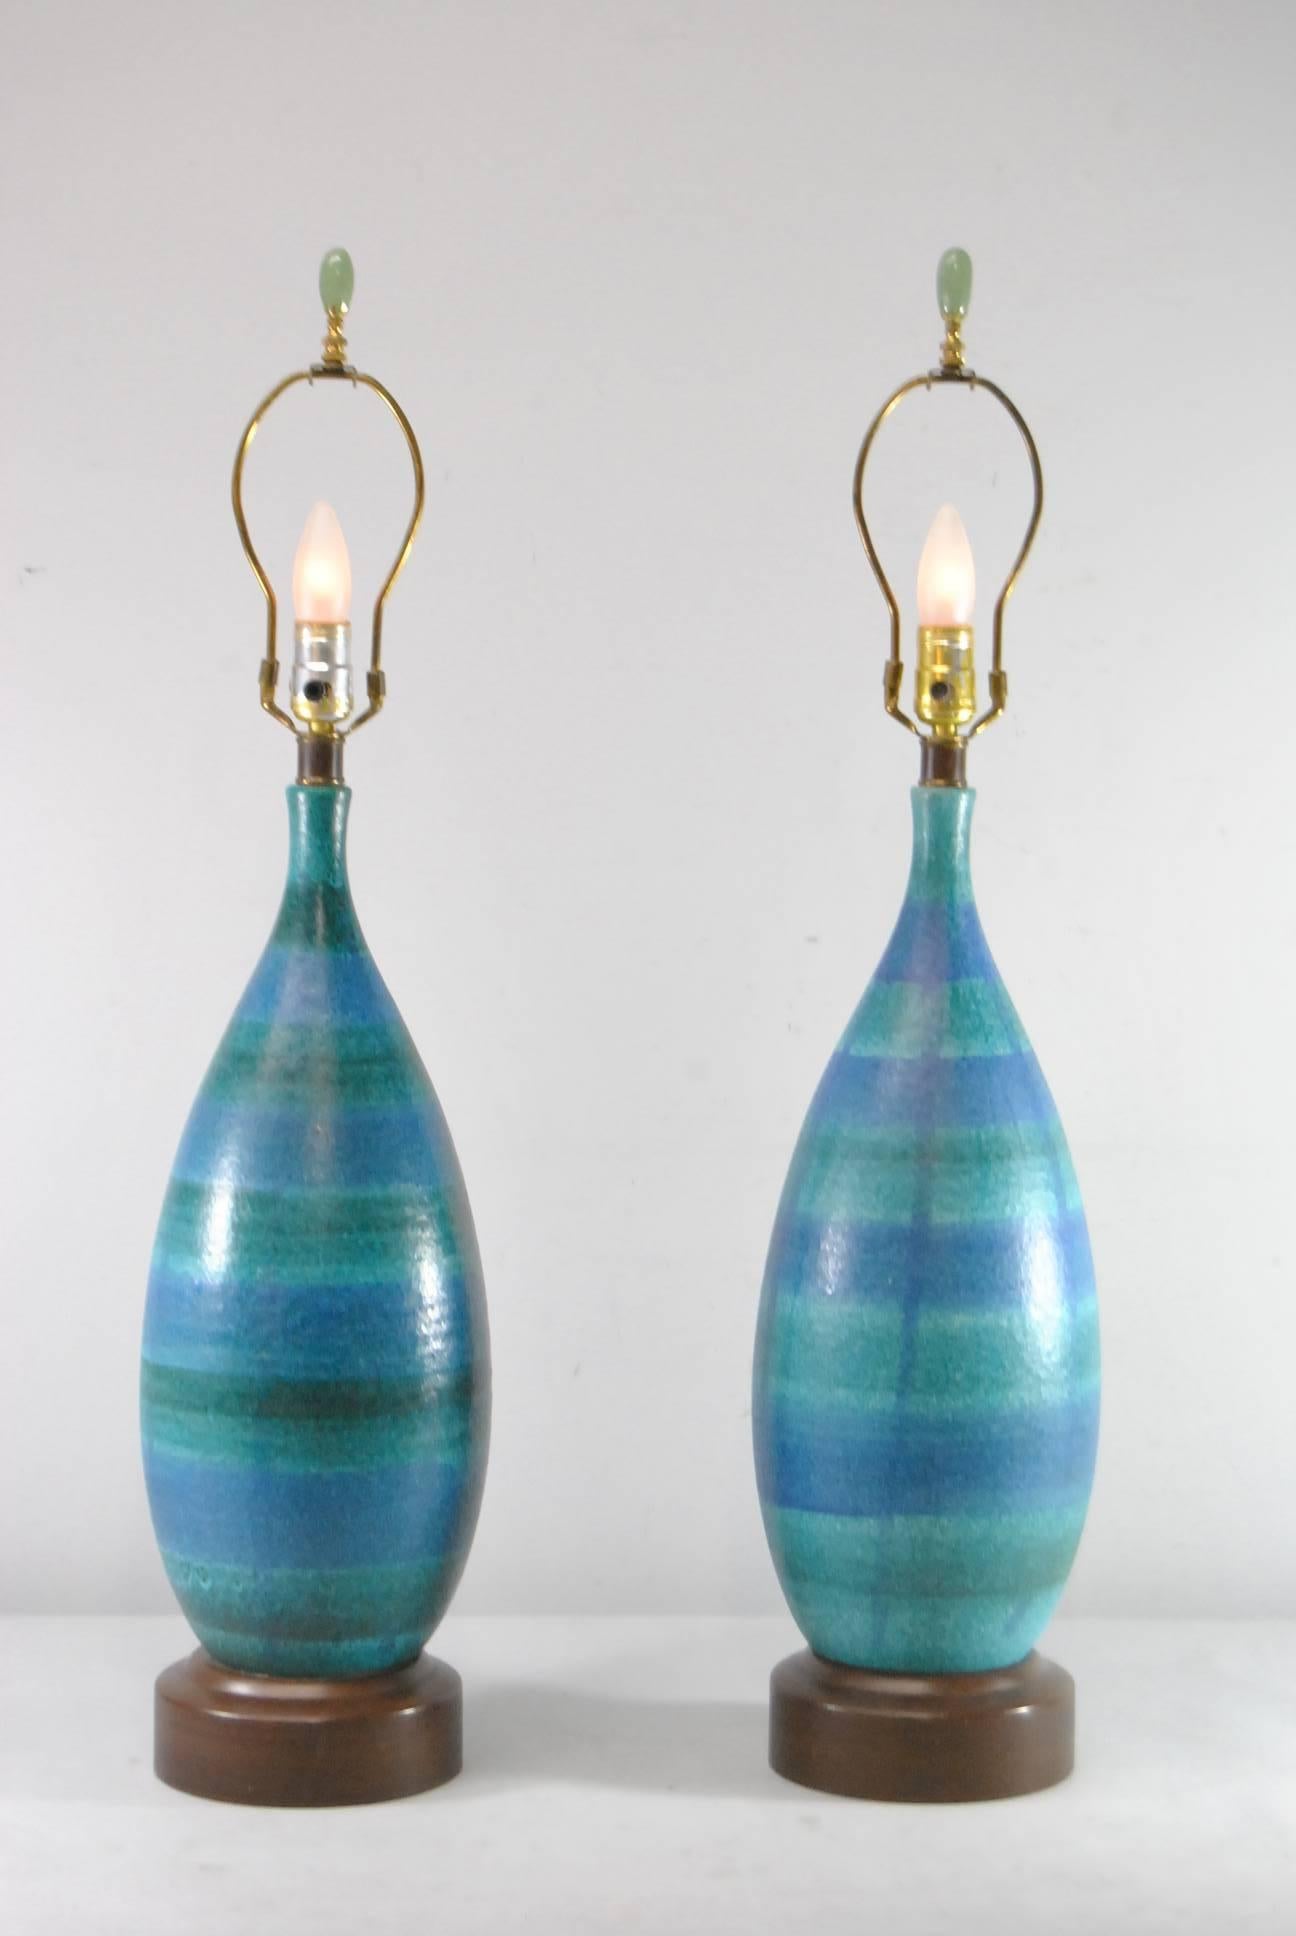 Pair of Bitossi for Raymor Pottery Vases mounted as table lamps. Decorated in blue and green glazes with jade finials. Very good condition with two firing glaze blemished that were in the making. Shades are not included. It is 34